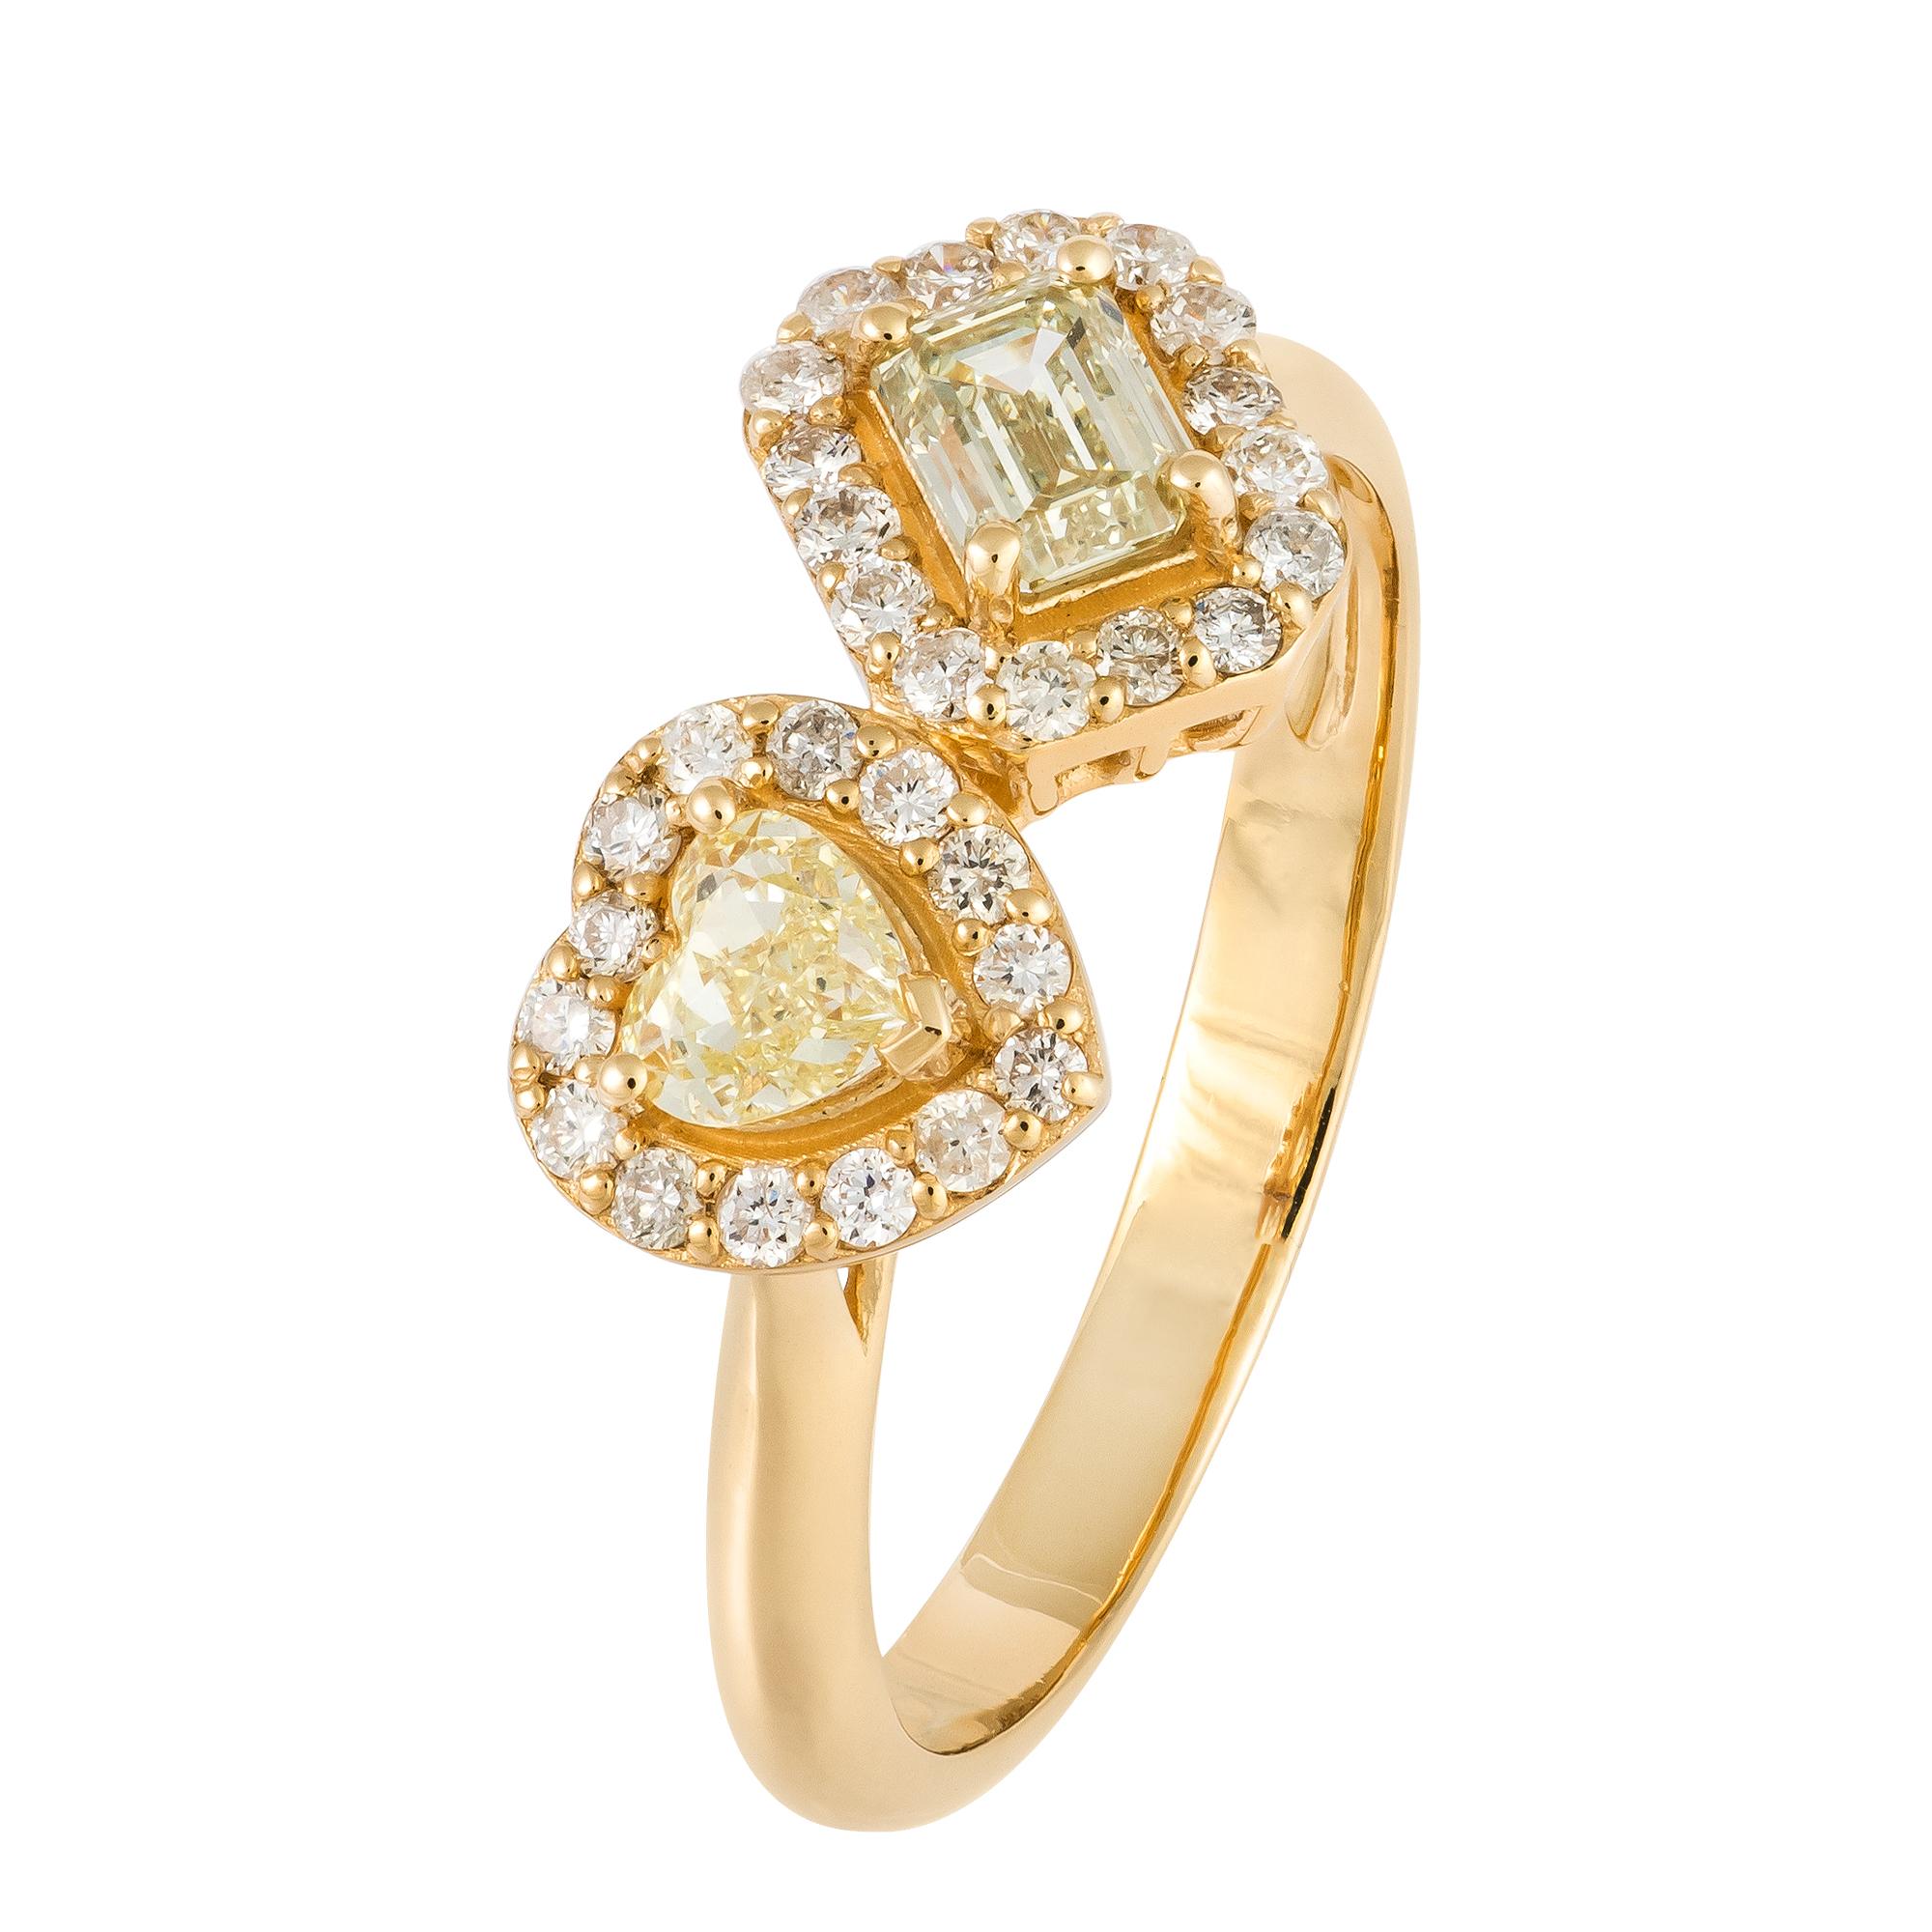 For Sale:  Impressive Yellow 18K Gold White Yellow Diamond Ring For Her 3